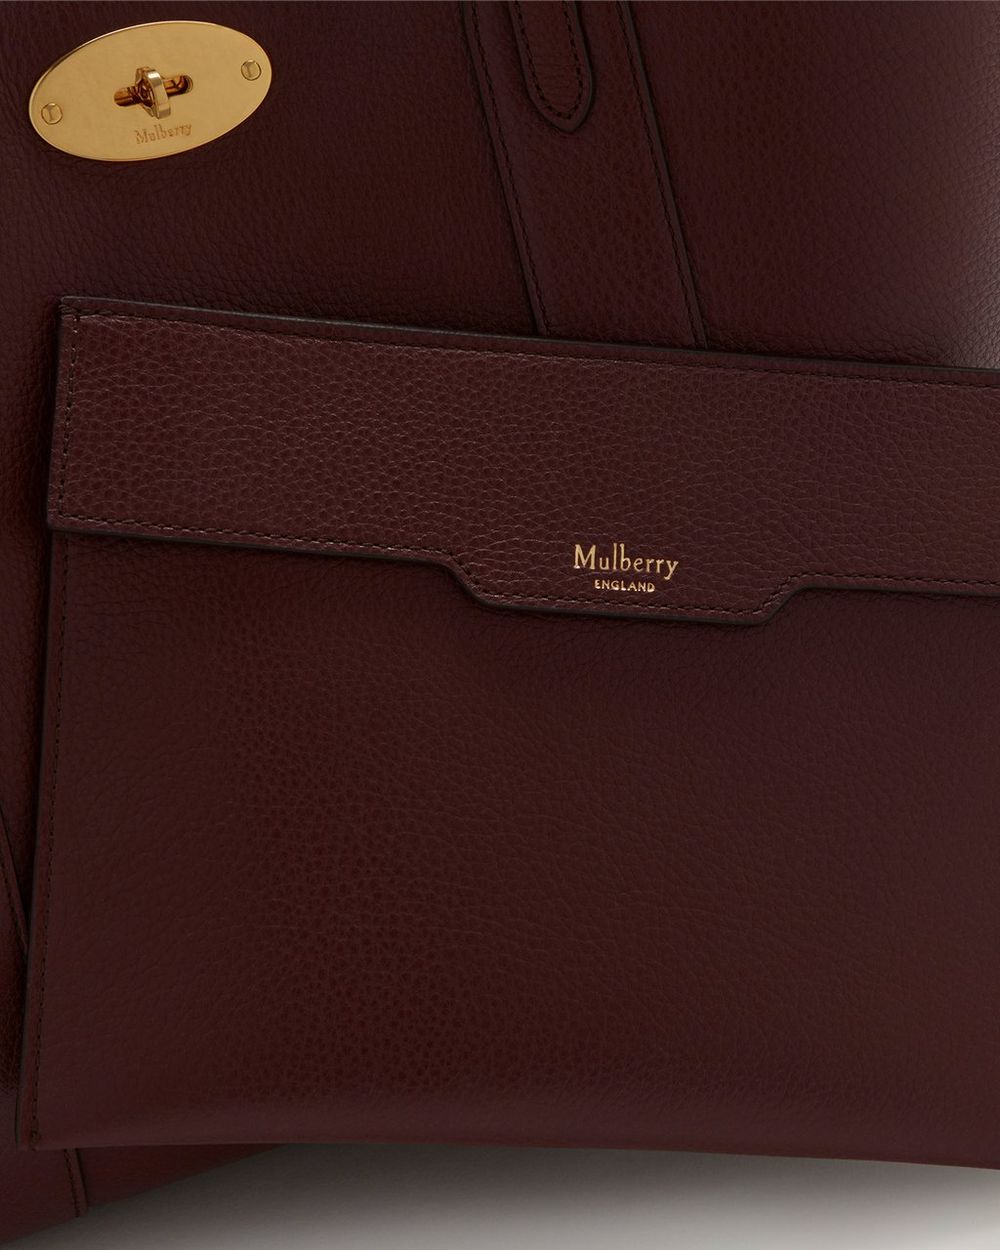 Mulberry Bayswater Tote Bag